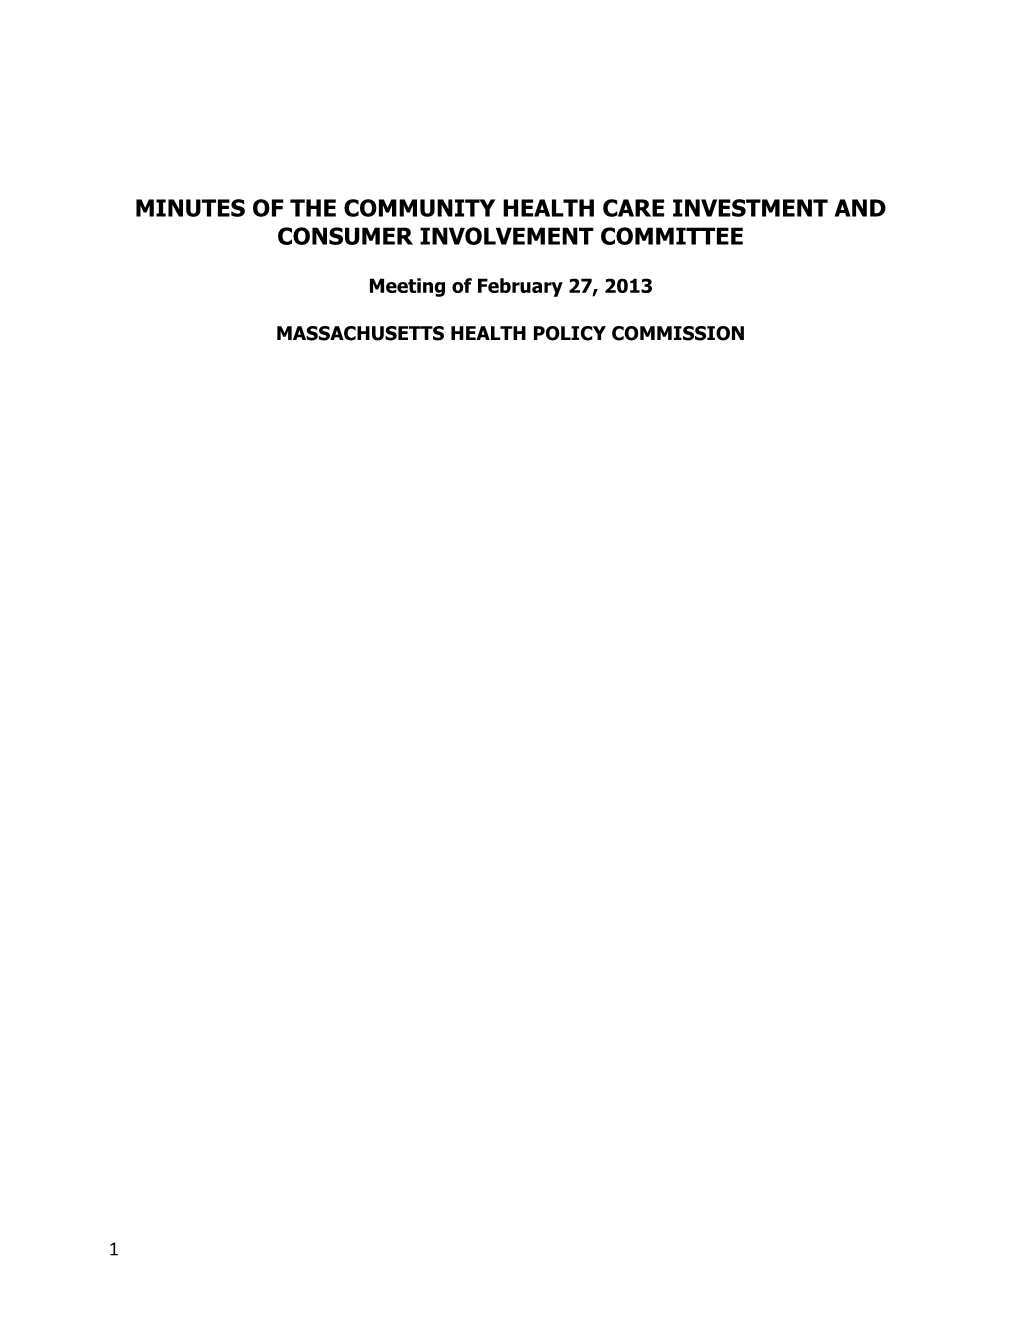 Minutes of the Community Health Care Investment and Consumer Involvement Committee